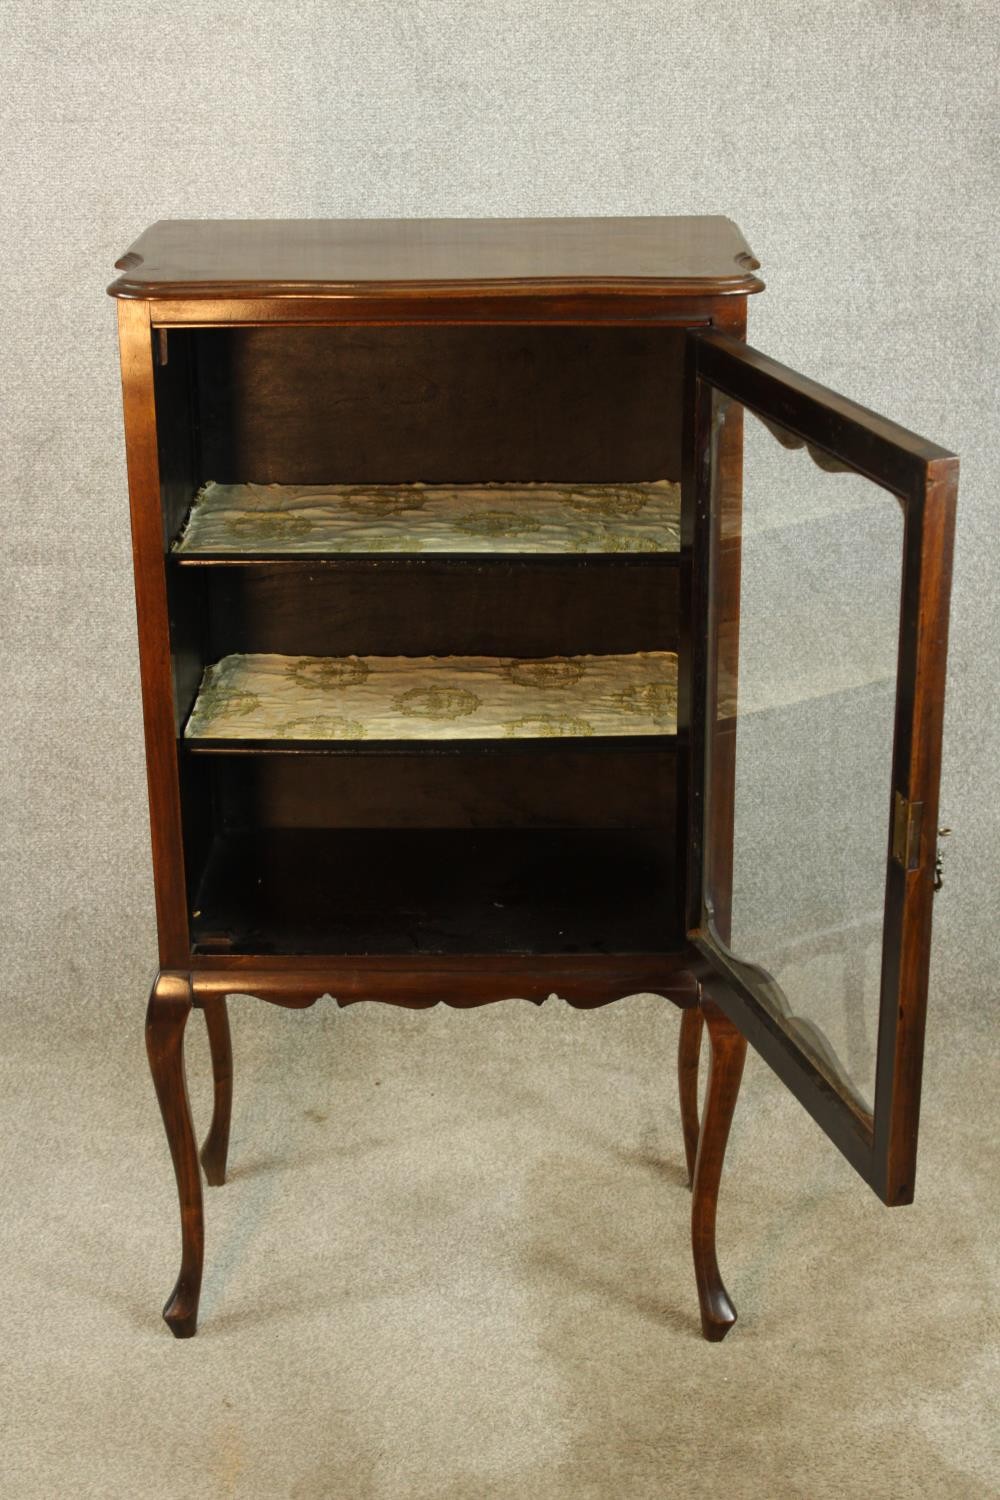 A late 19th century mahogany single glass door display cabinet opening to reveal three shelves, - Image 3 of 8